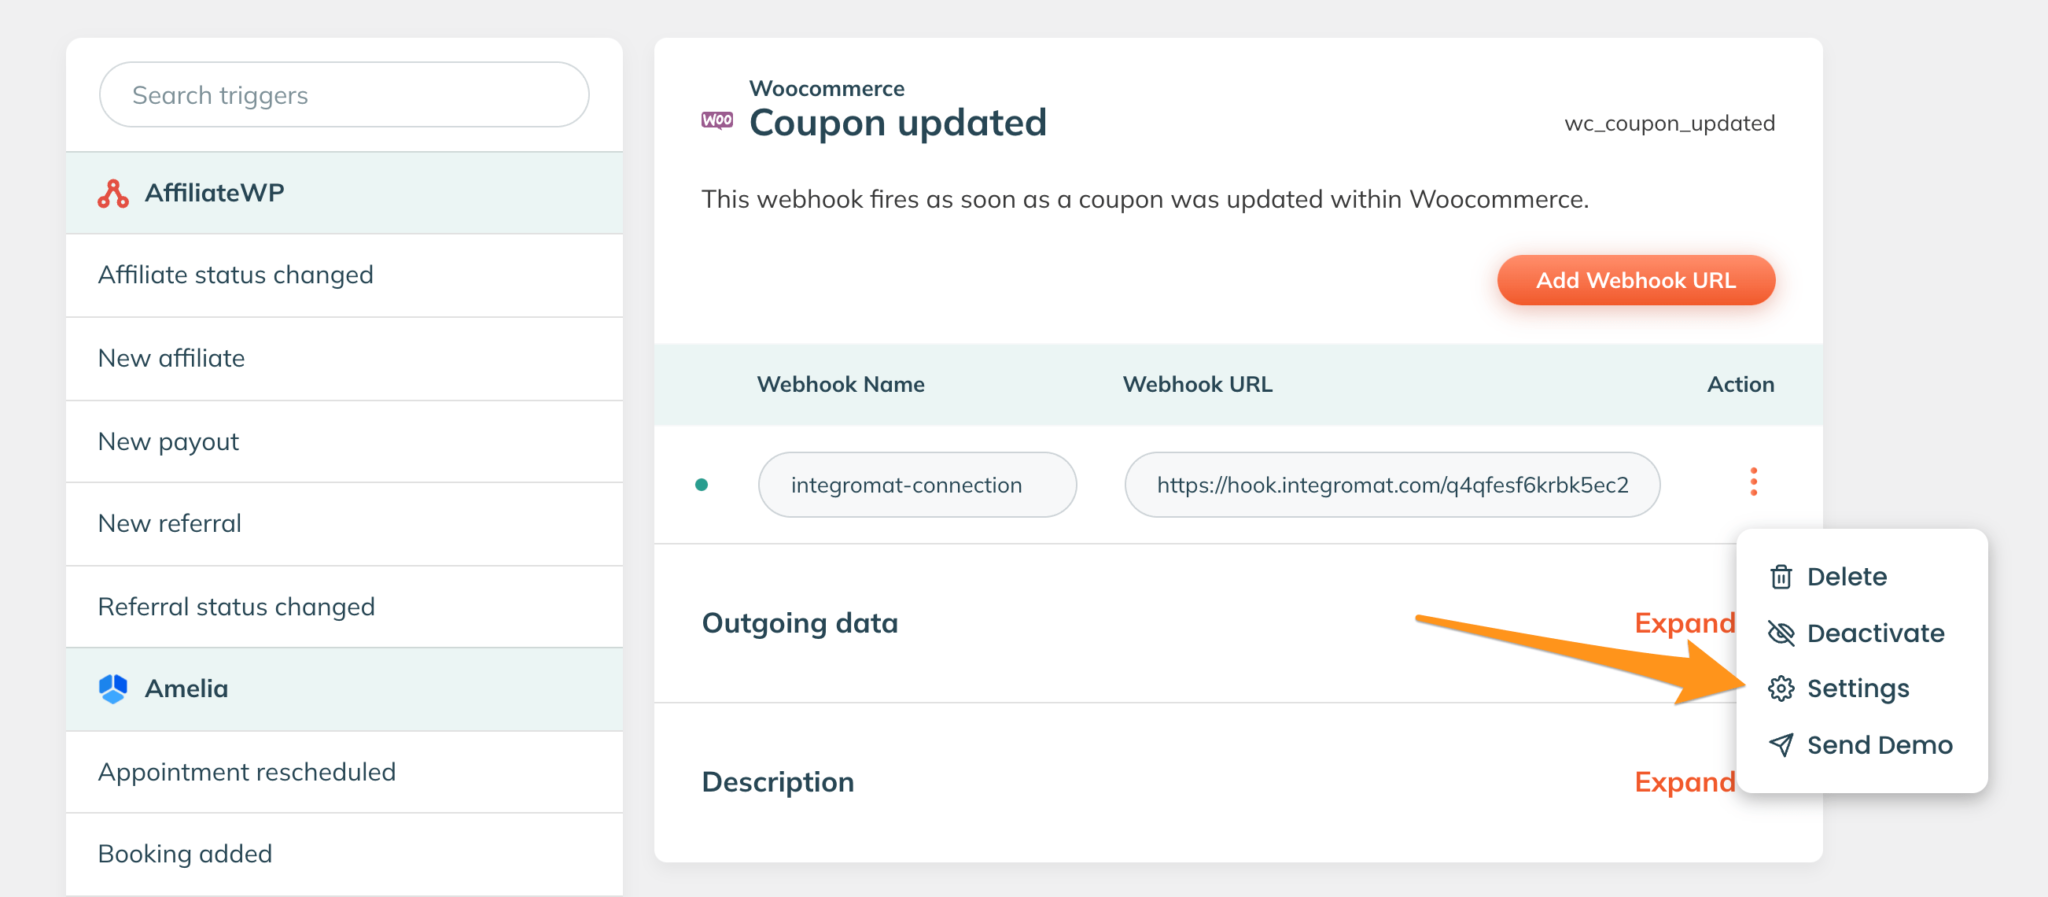 The WP Webhooks screen of the Subscription cancelled trigger